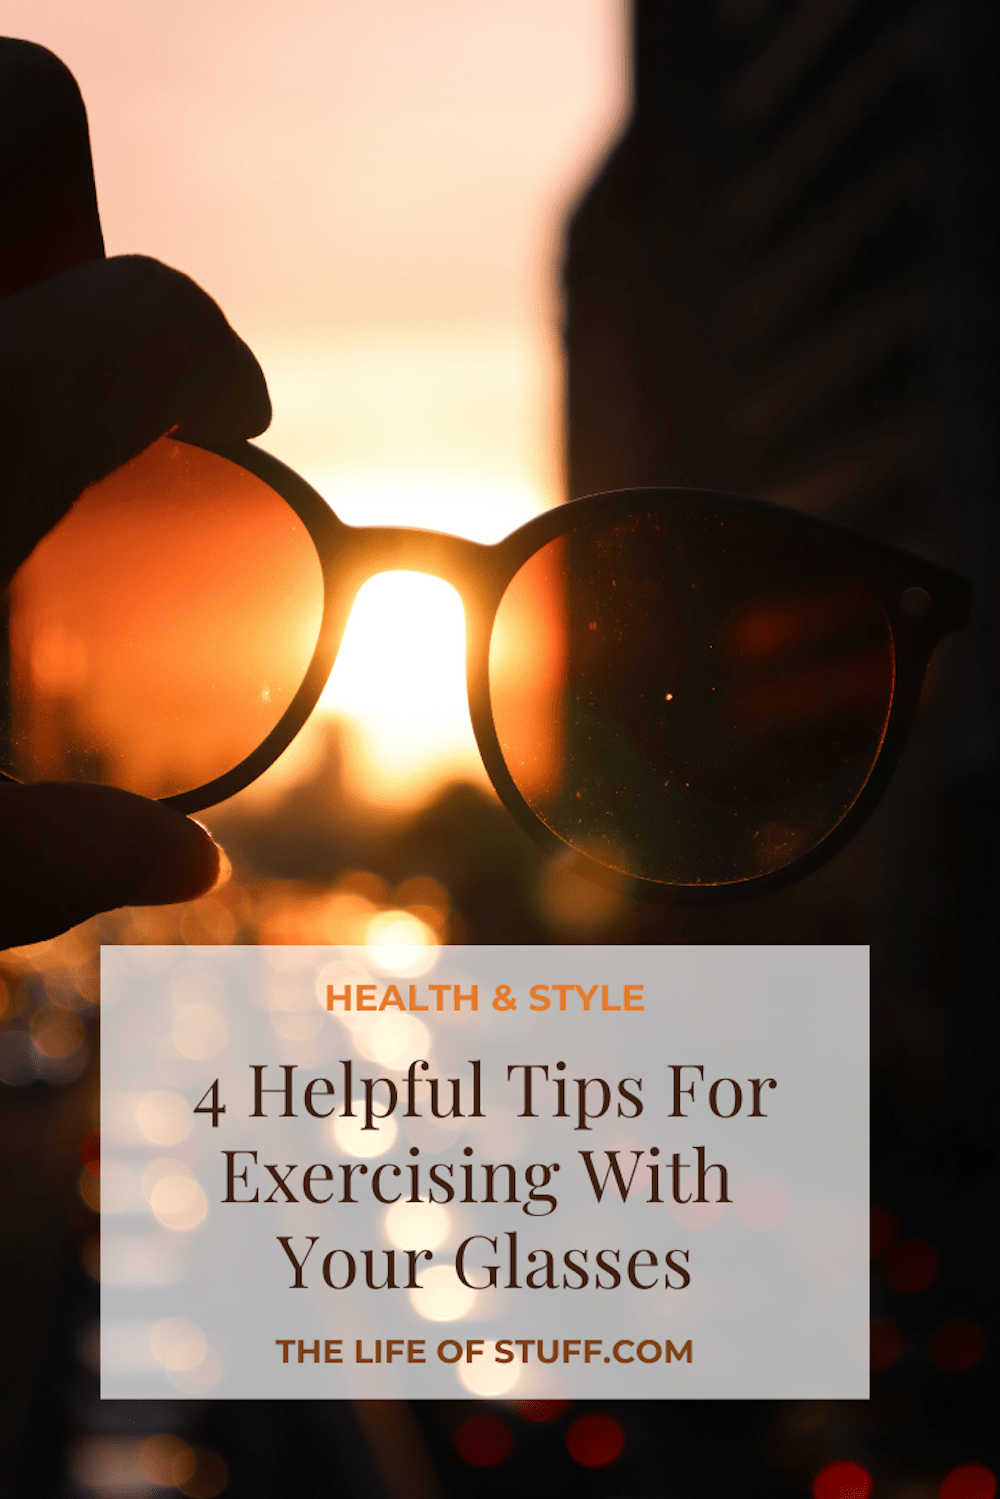 4 Helpful Tips For Exercising With Your Glasses - The Life of Stuff